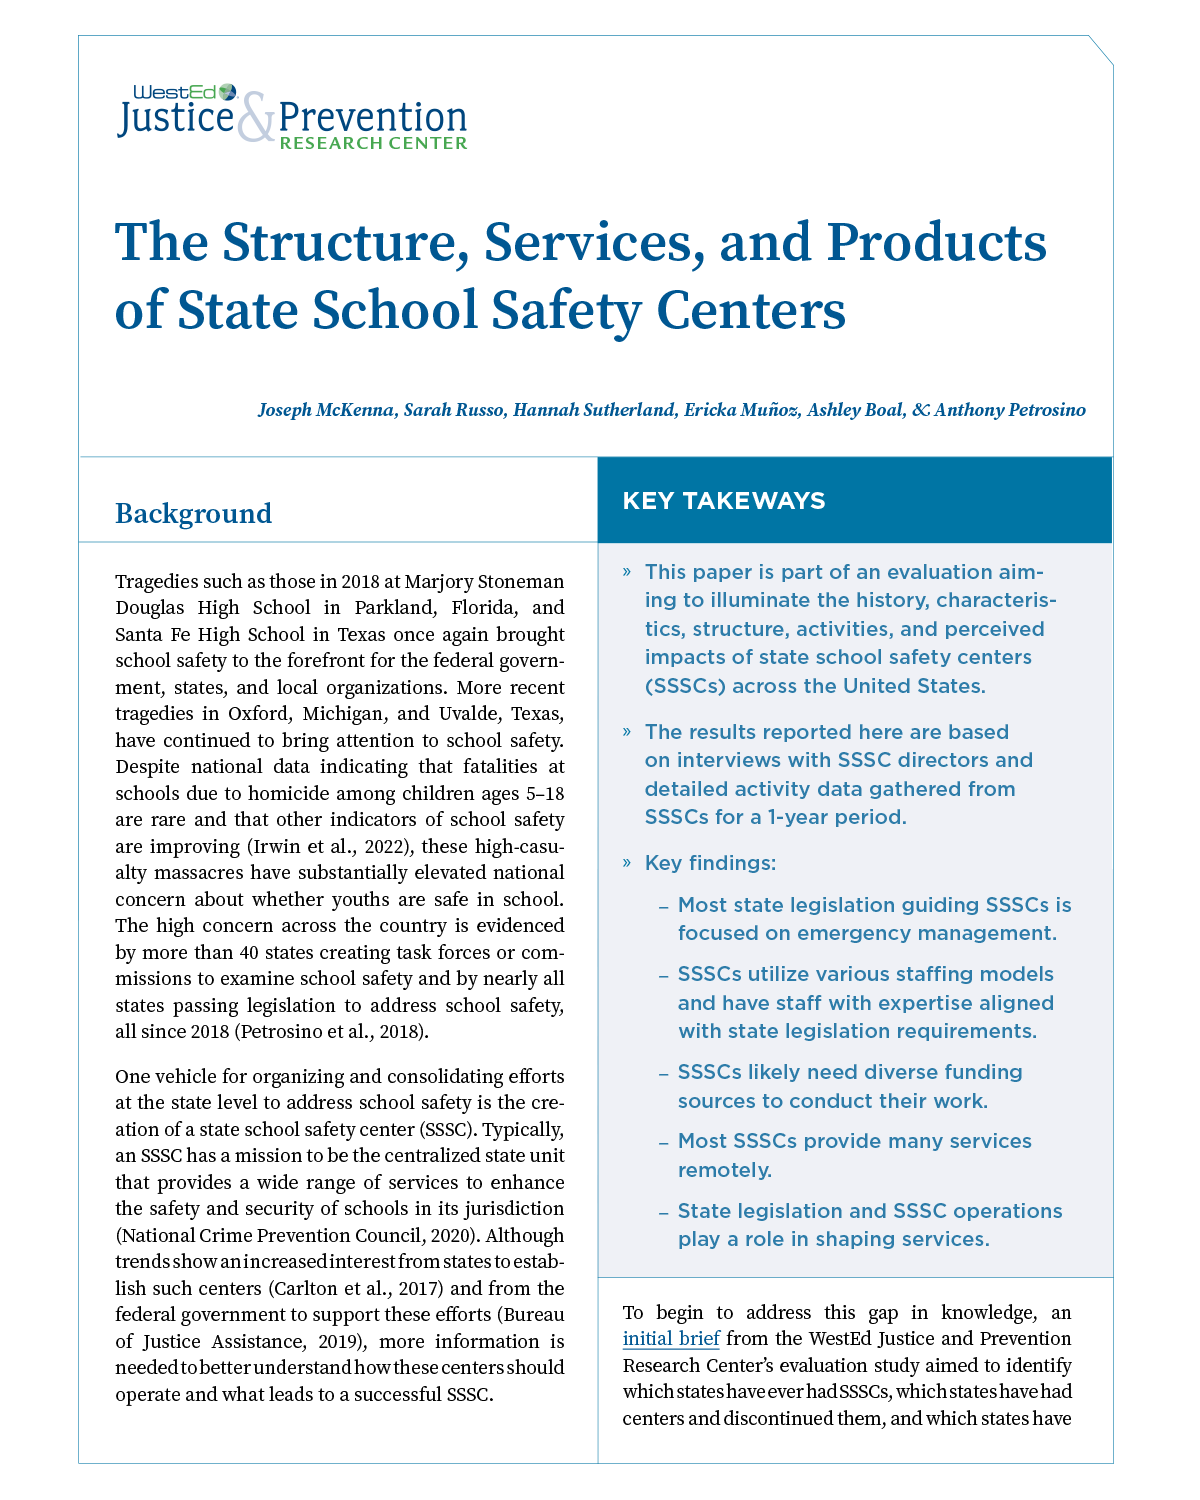 Structure Services and Products of State School Safety Centers